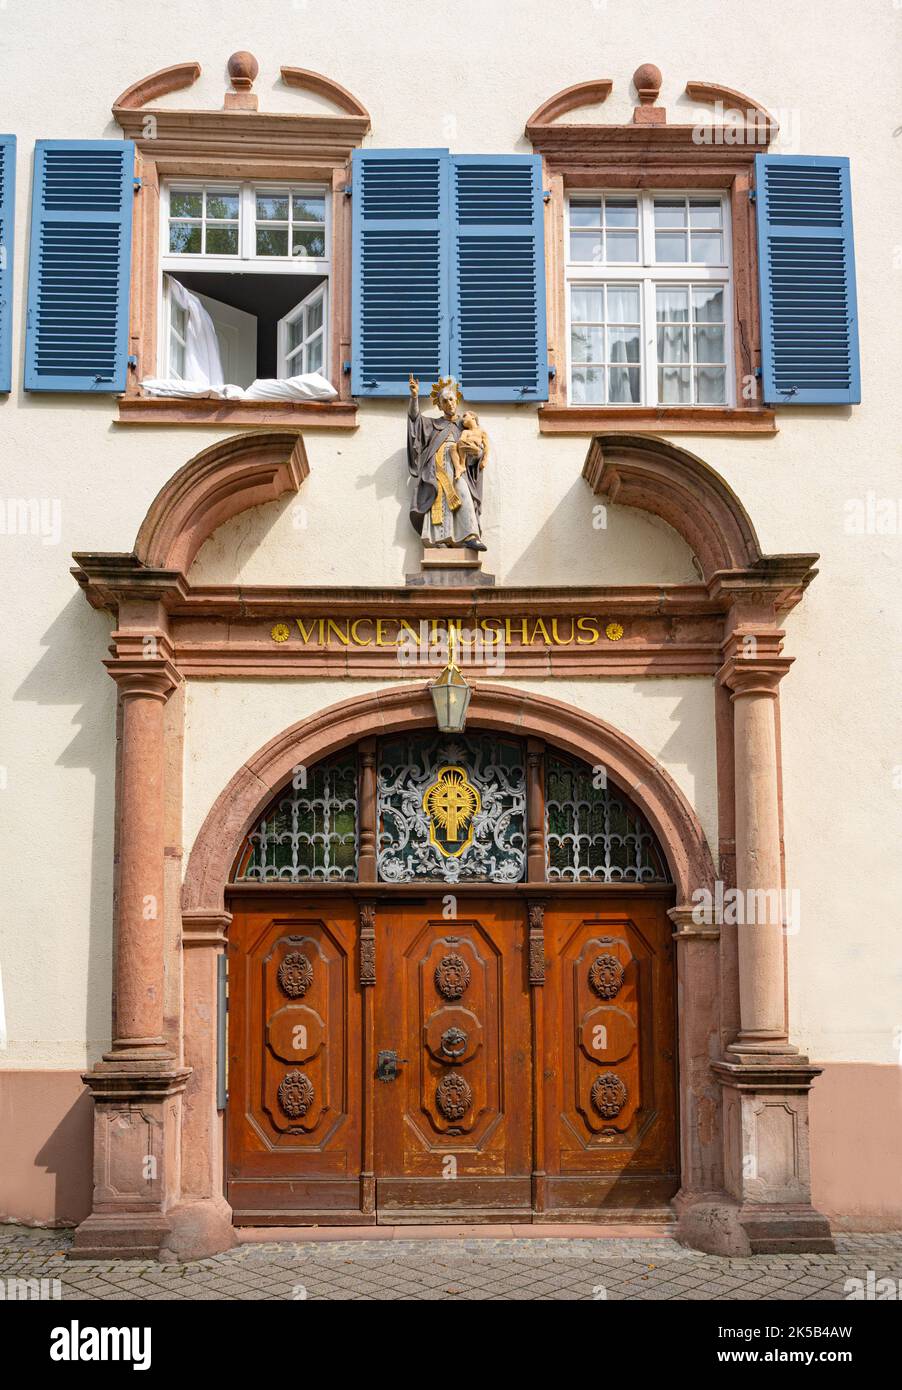 Entrance portal of the Vincentiushaus in Offenburg. Baden Wuerttemberg, Germany, Europe Stock Photo